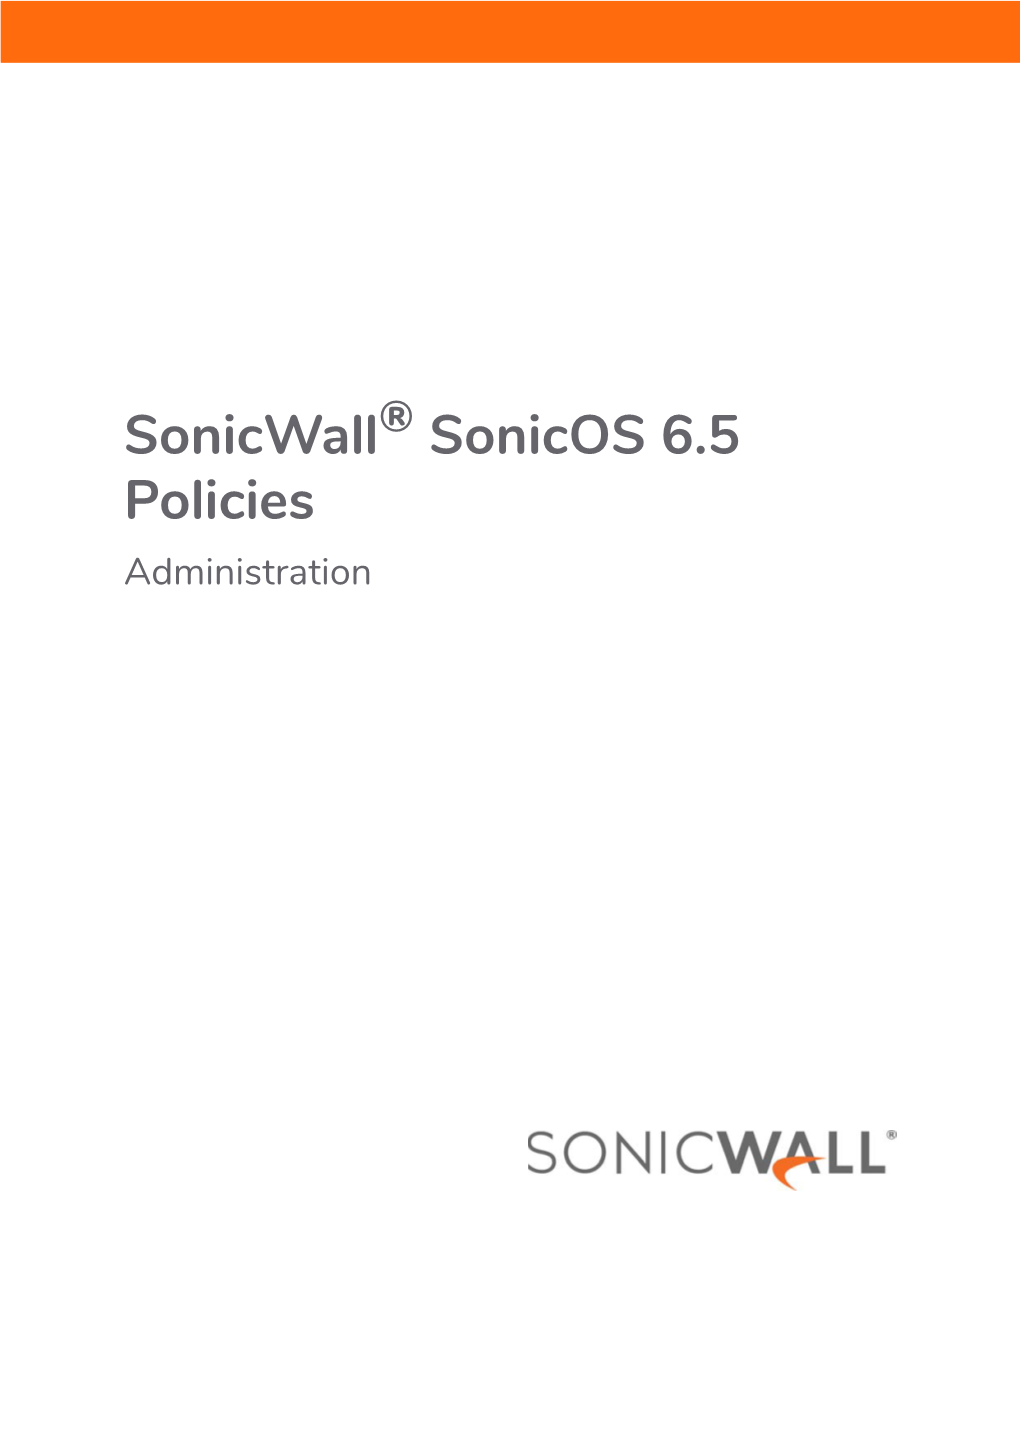 Sonicos 6.5 Policies Administration Contents 1